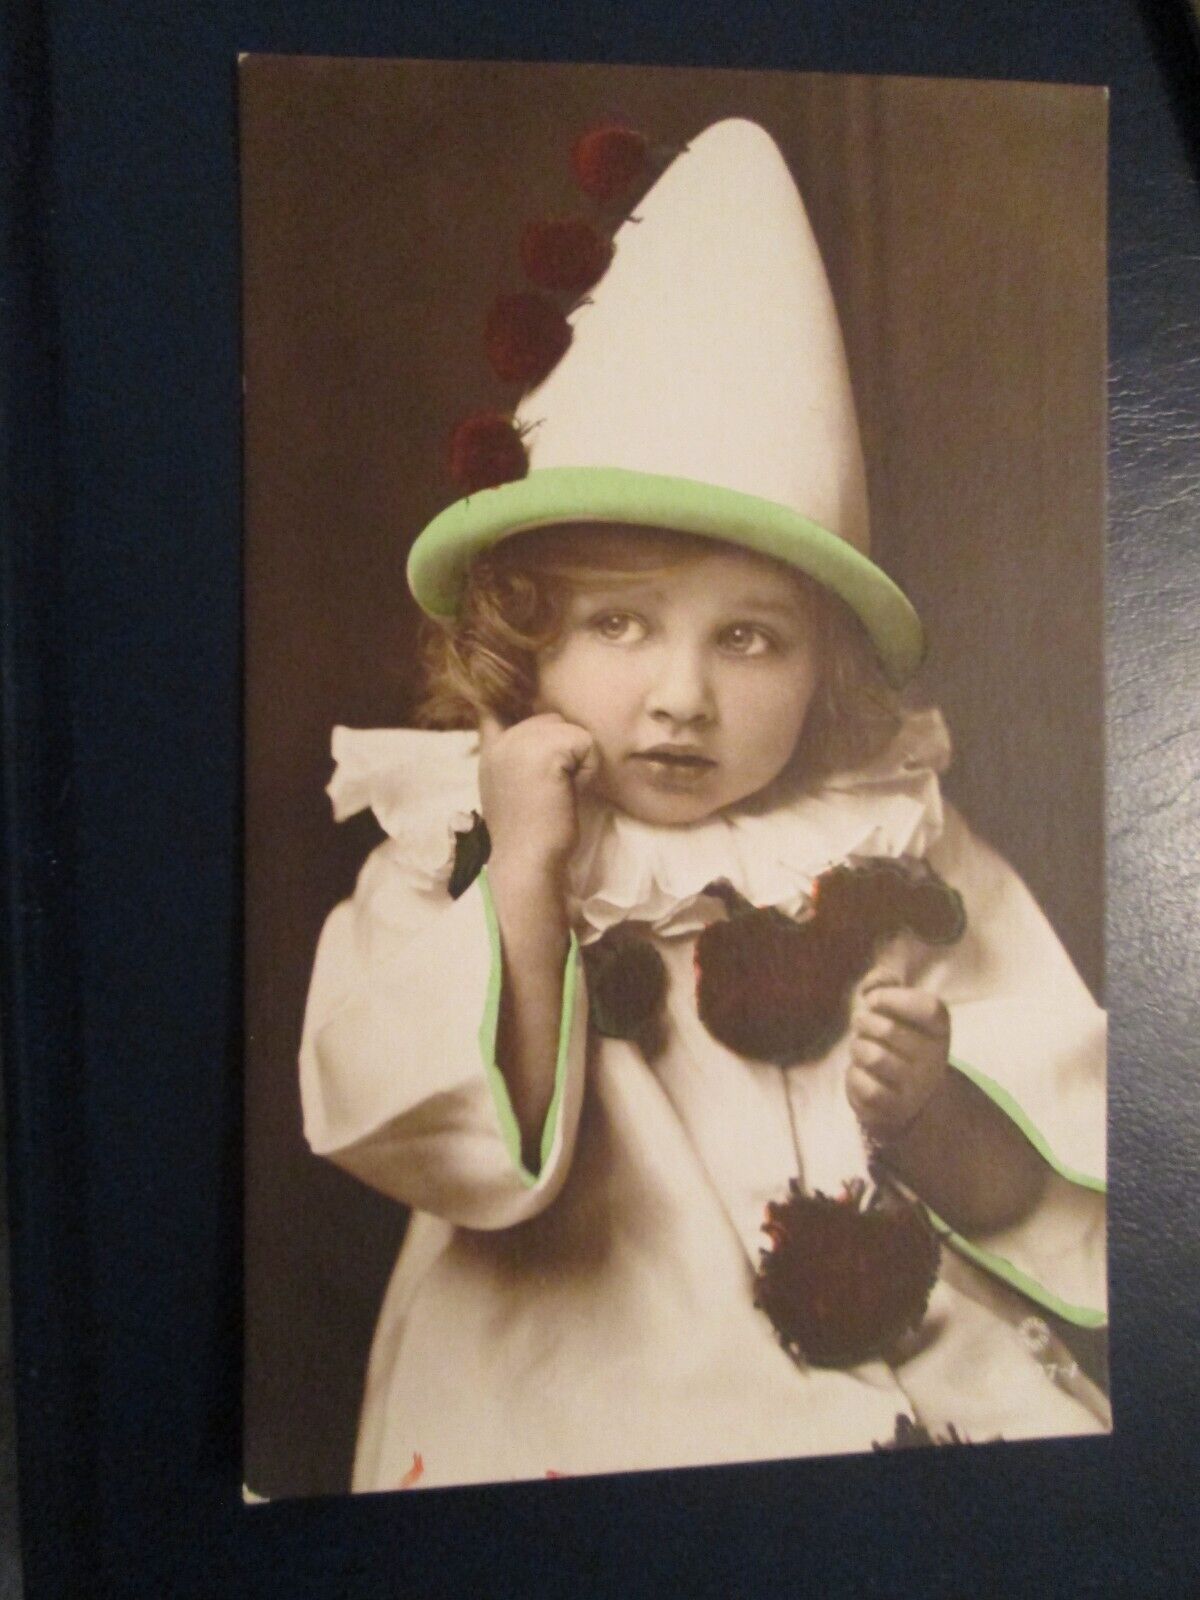 House Clearance - Service Child as clown or Pierrot, Handpainted RP Gladys Cooper's daughter Joan